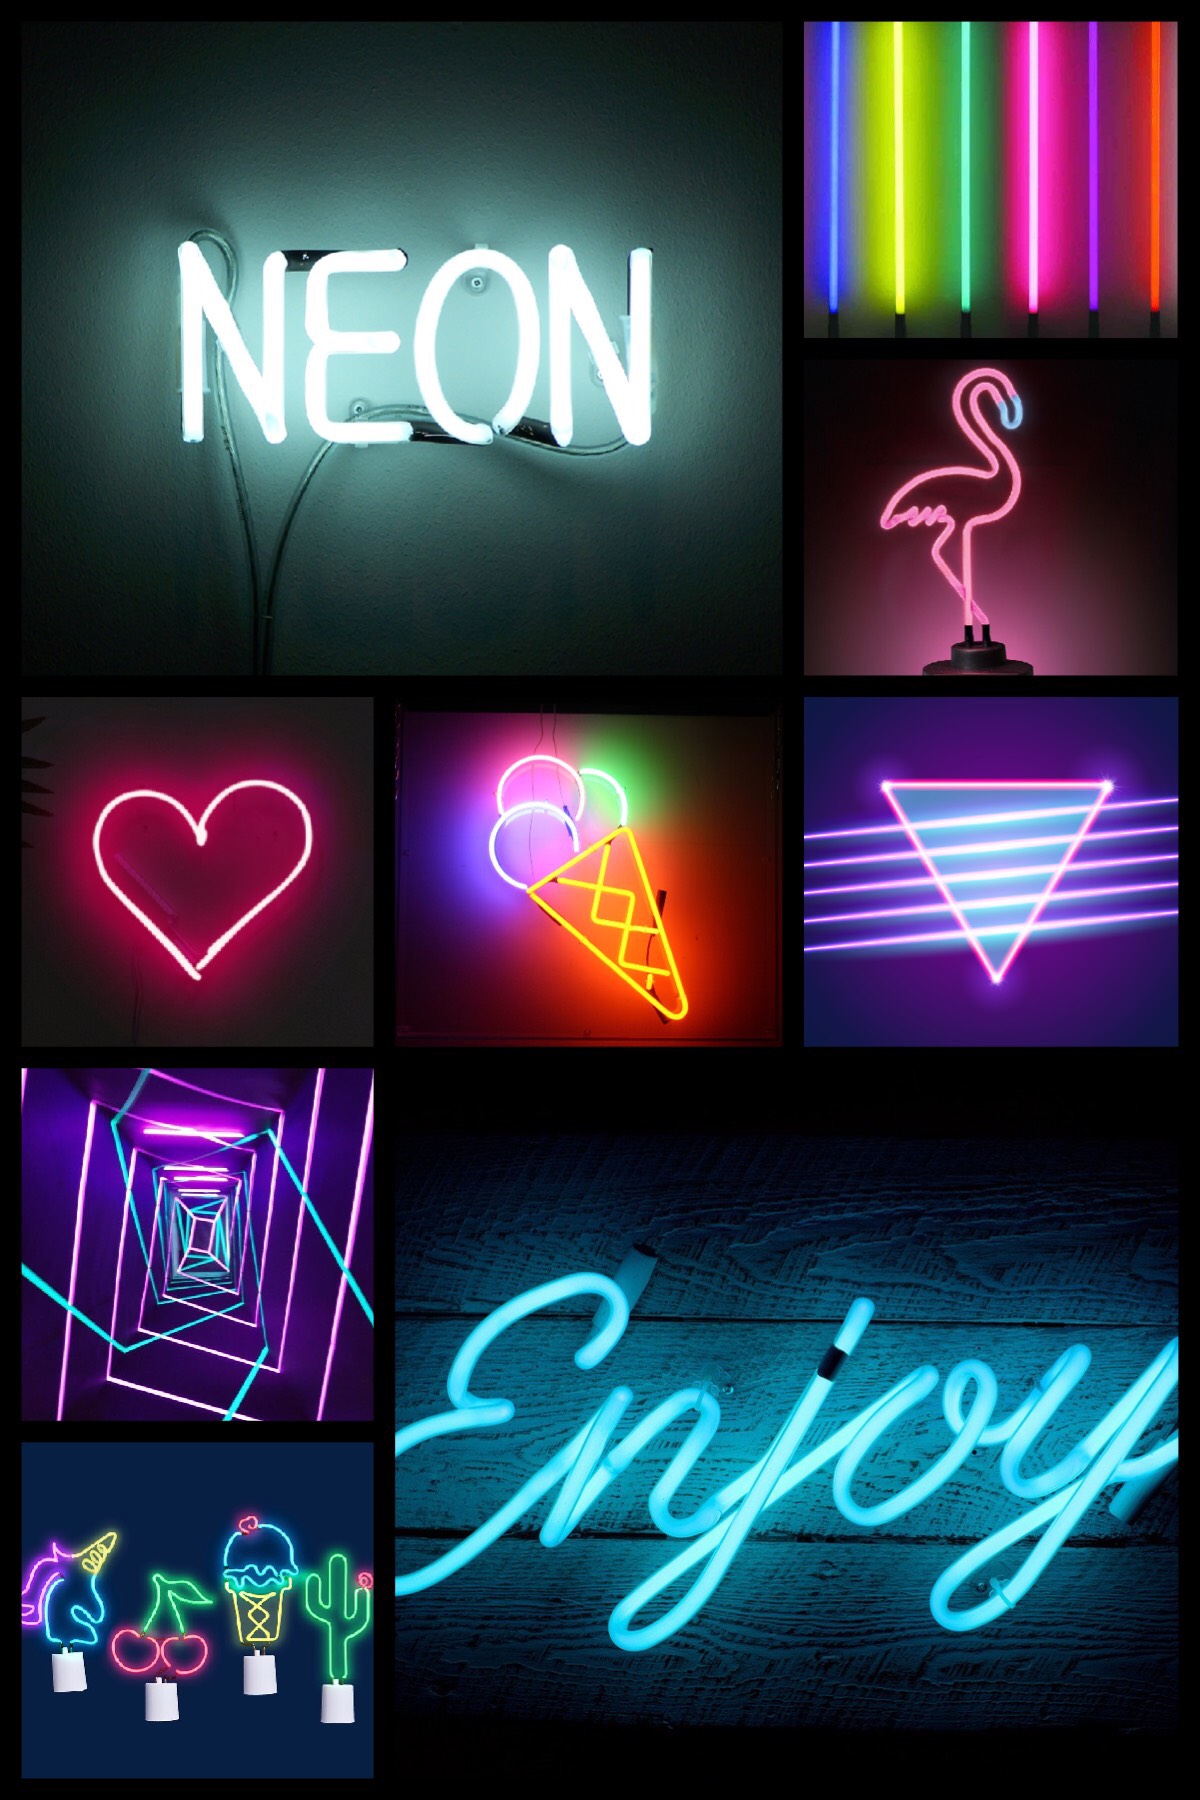 OMG!!!! ITS HERE! The Neon Addition is here! Dont worry ill make sure ill postcmore of these. Its amazing how people made and shaped these lights! I hope you have fun! #Neonaddition #lights #neon #BeCRRATIVE